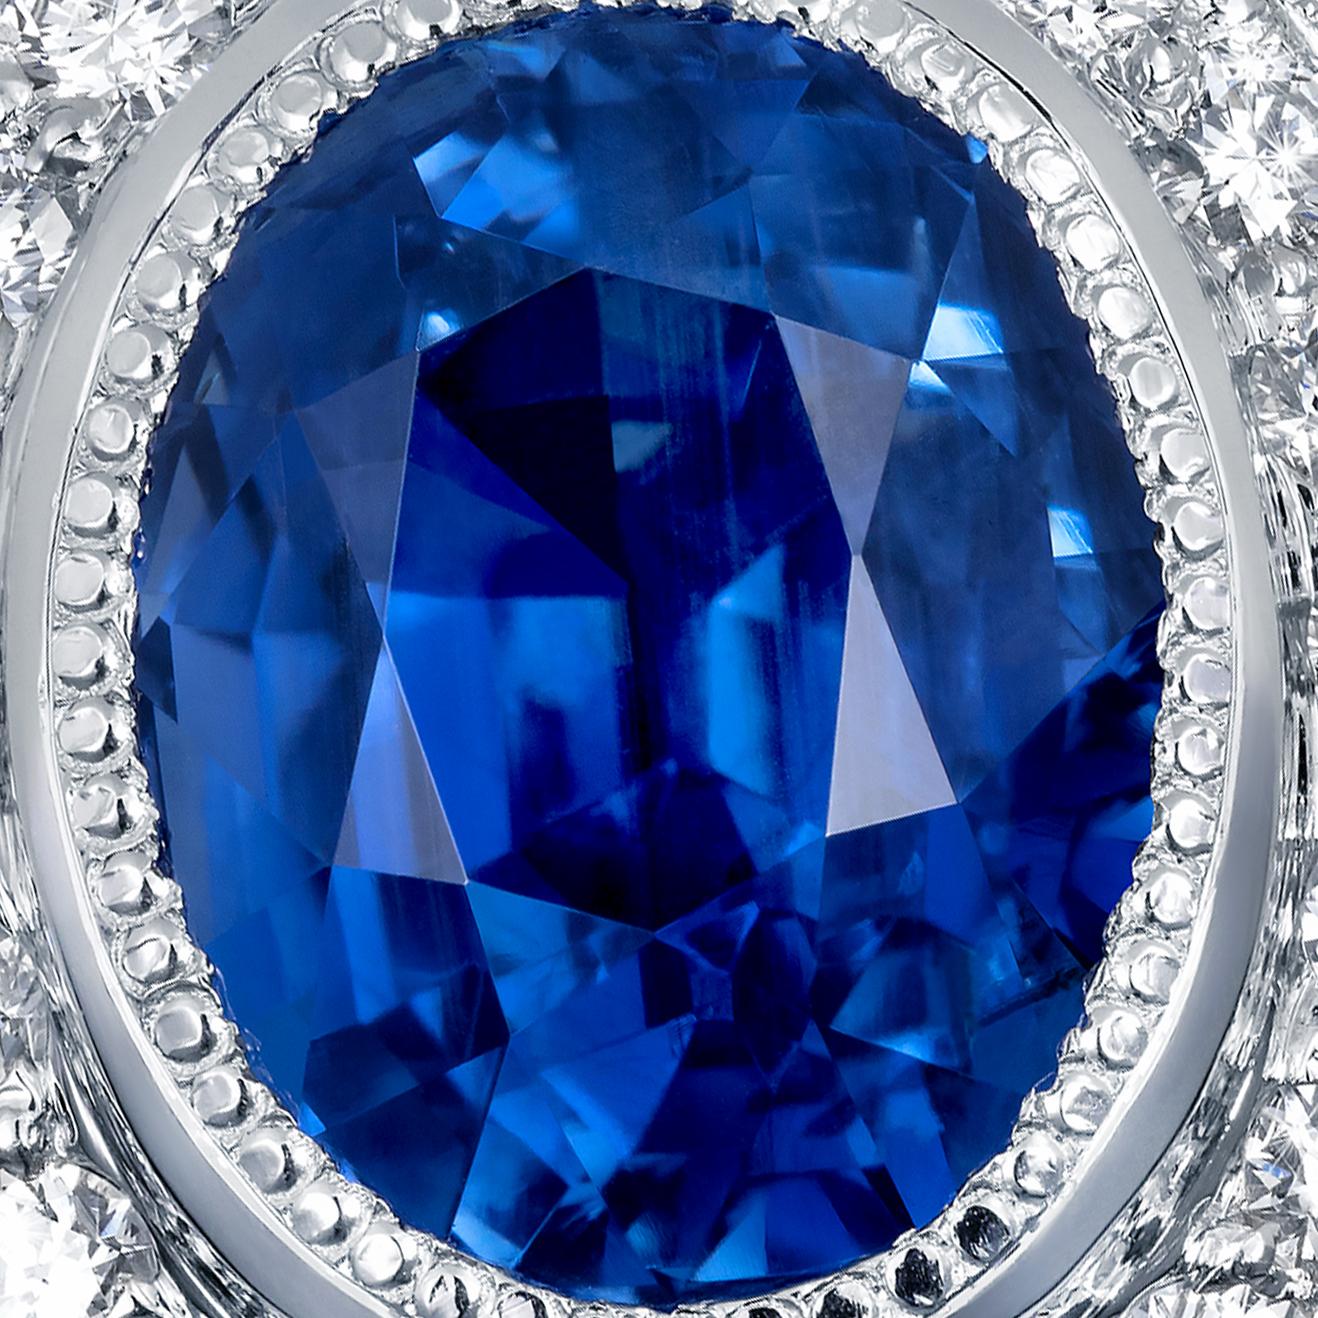 A beautiful royal blue oval sapphire is set amongst diamonds in this unique Regal setting with a beaded edge. This exquisite sapphire and diamond ring features a 3.61 carat oval shape Royal blue sapphire surrounded by a pretty halo of 42 brilliant